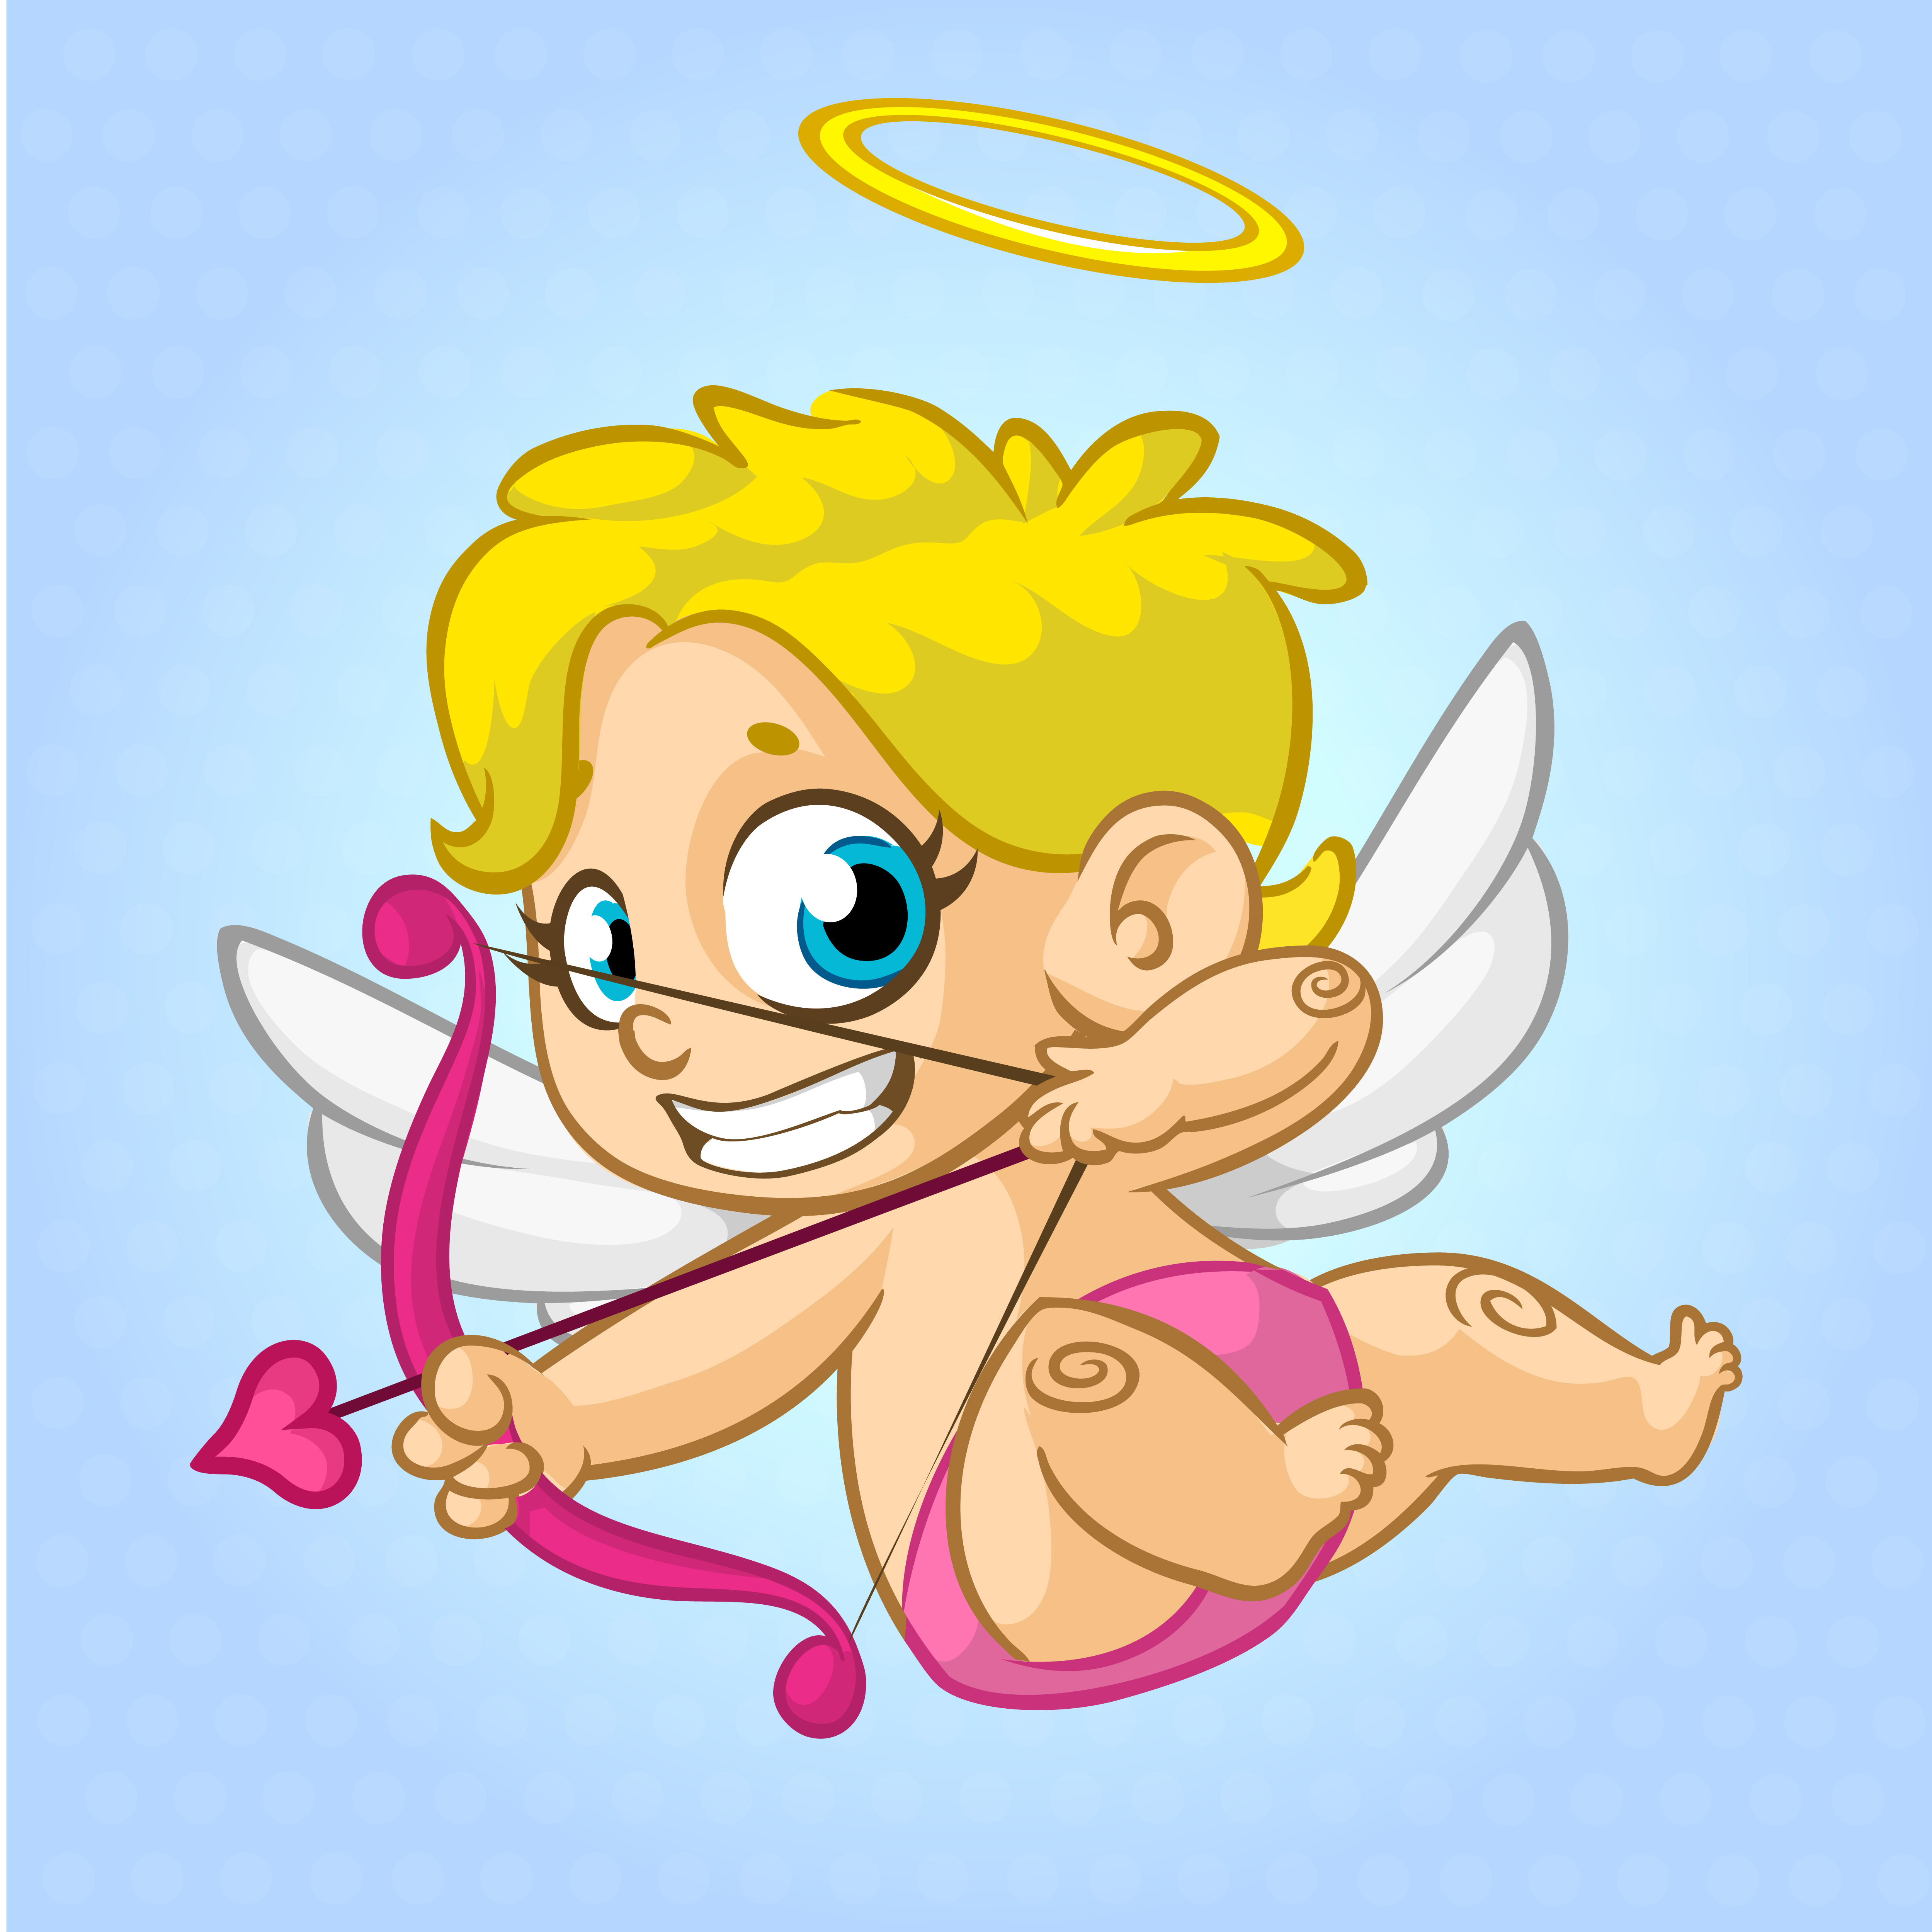 Bow,cartoon,Cupid,with Vector Cartoon and more resources at freedesignfile....